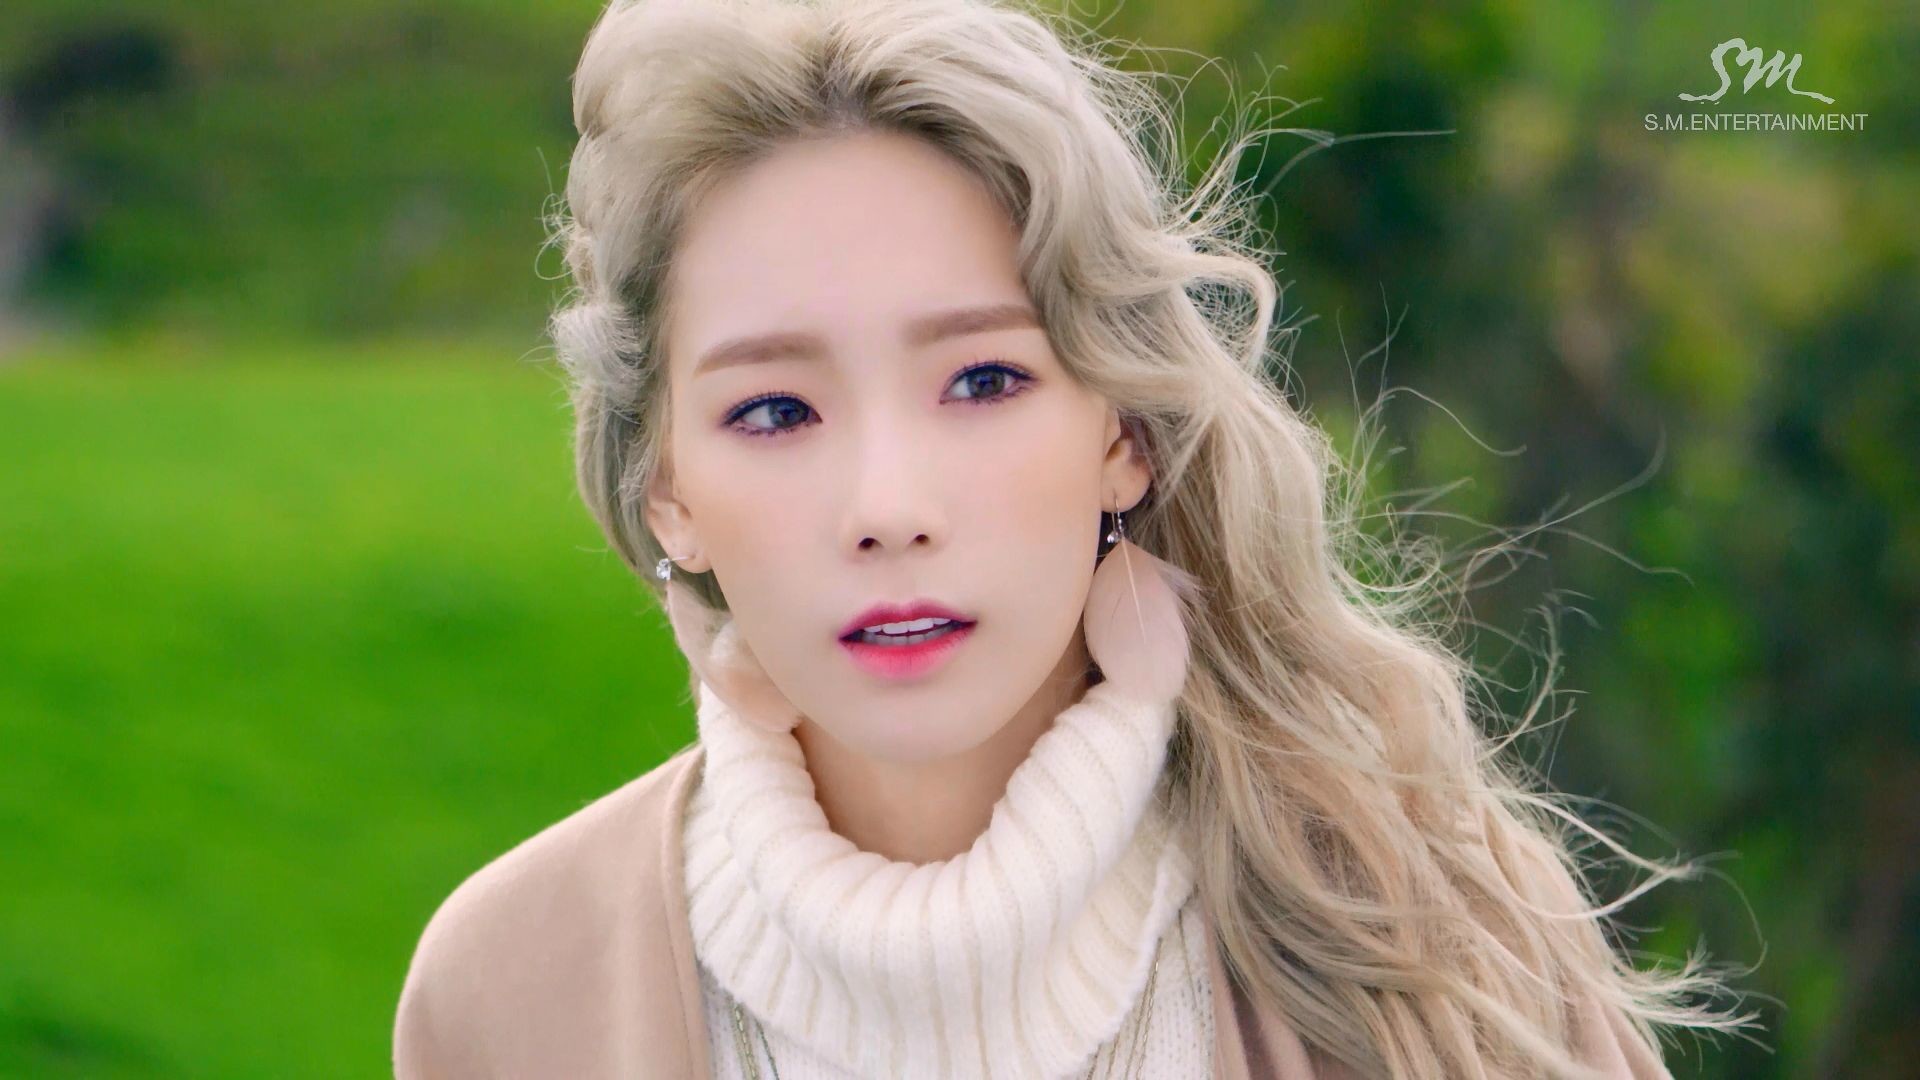 6. Taeyeon's Blonde Hair: The Evolution of Her Hair Color - wide 7